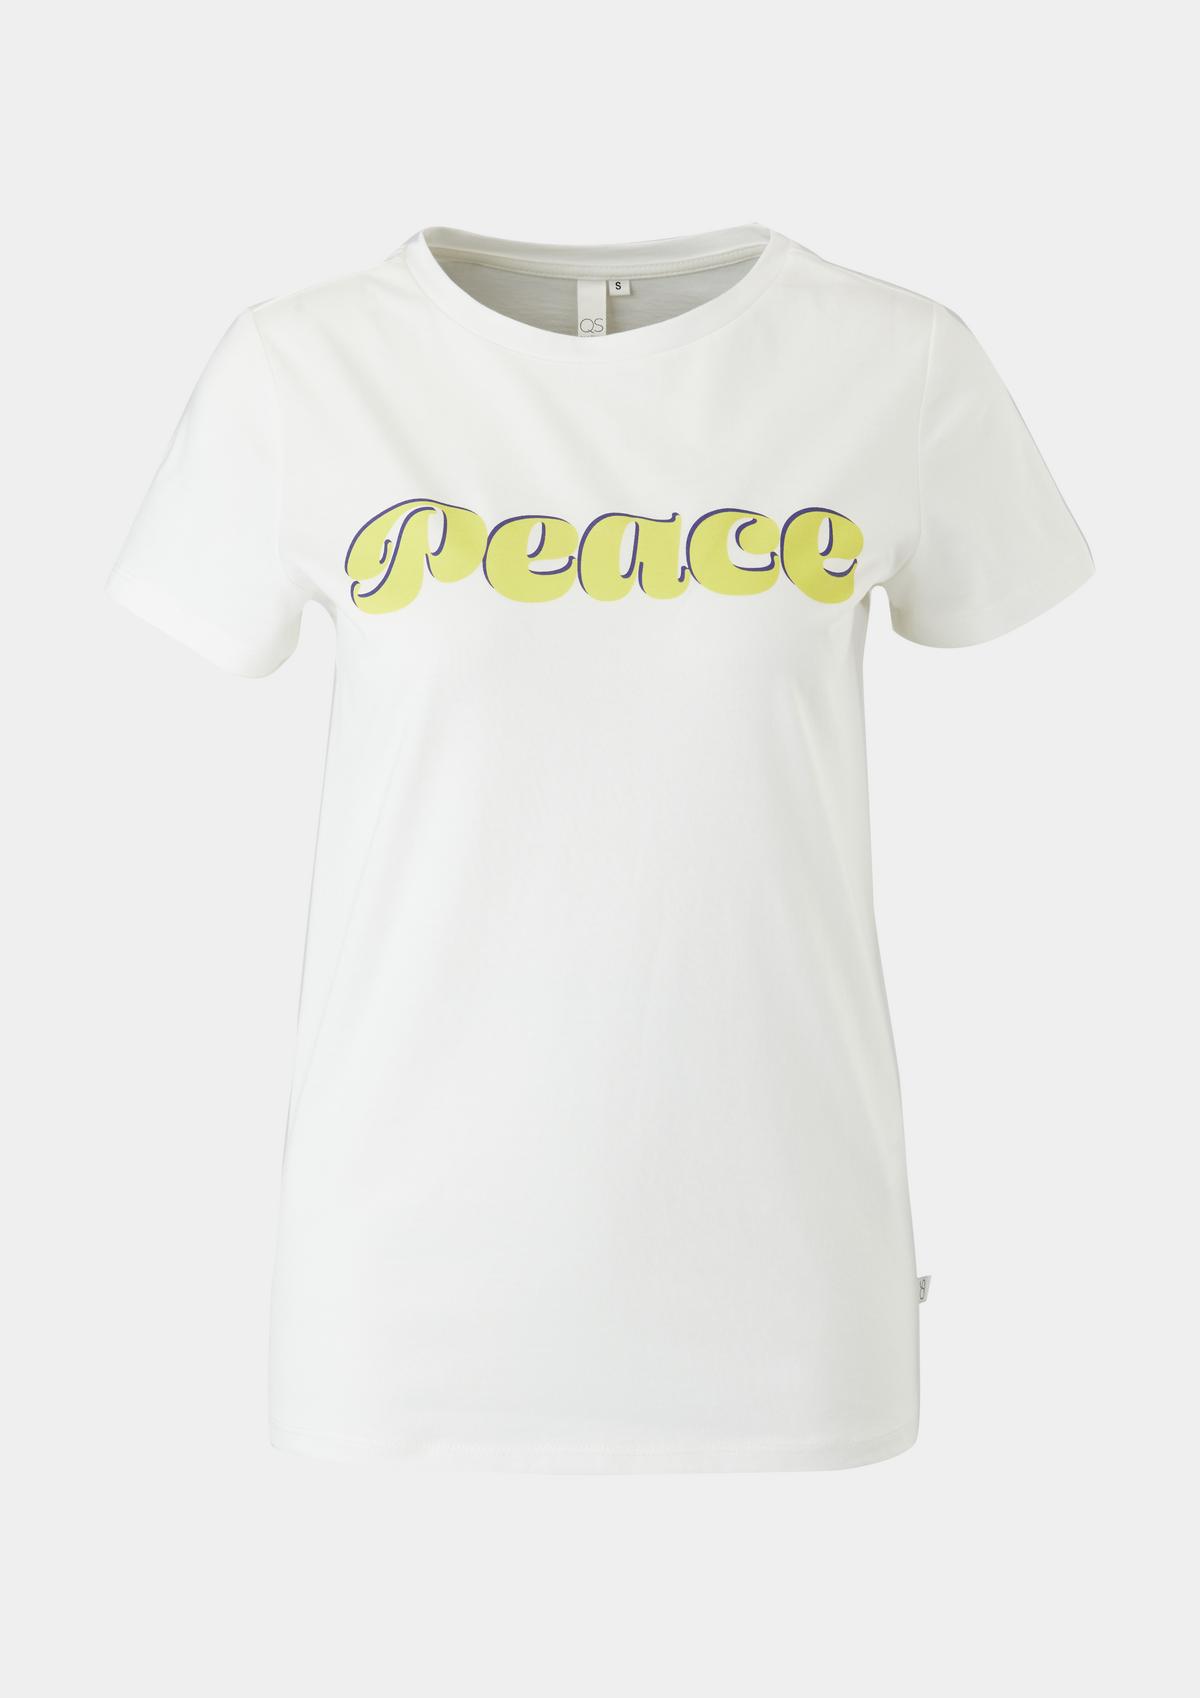 s.Oliver Jersey top with printed lettering